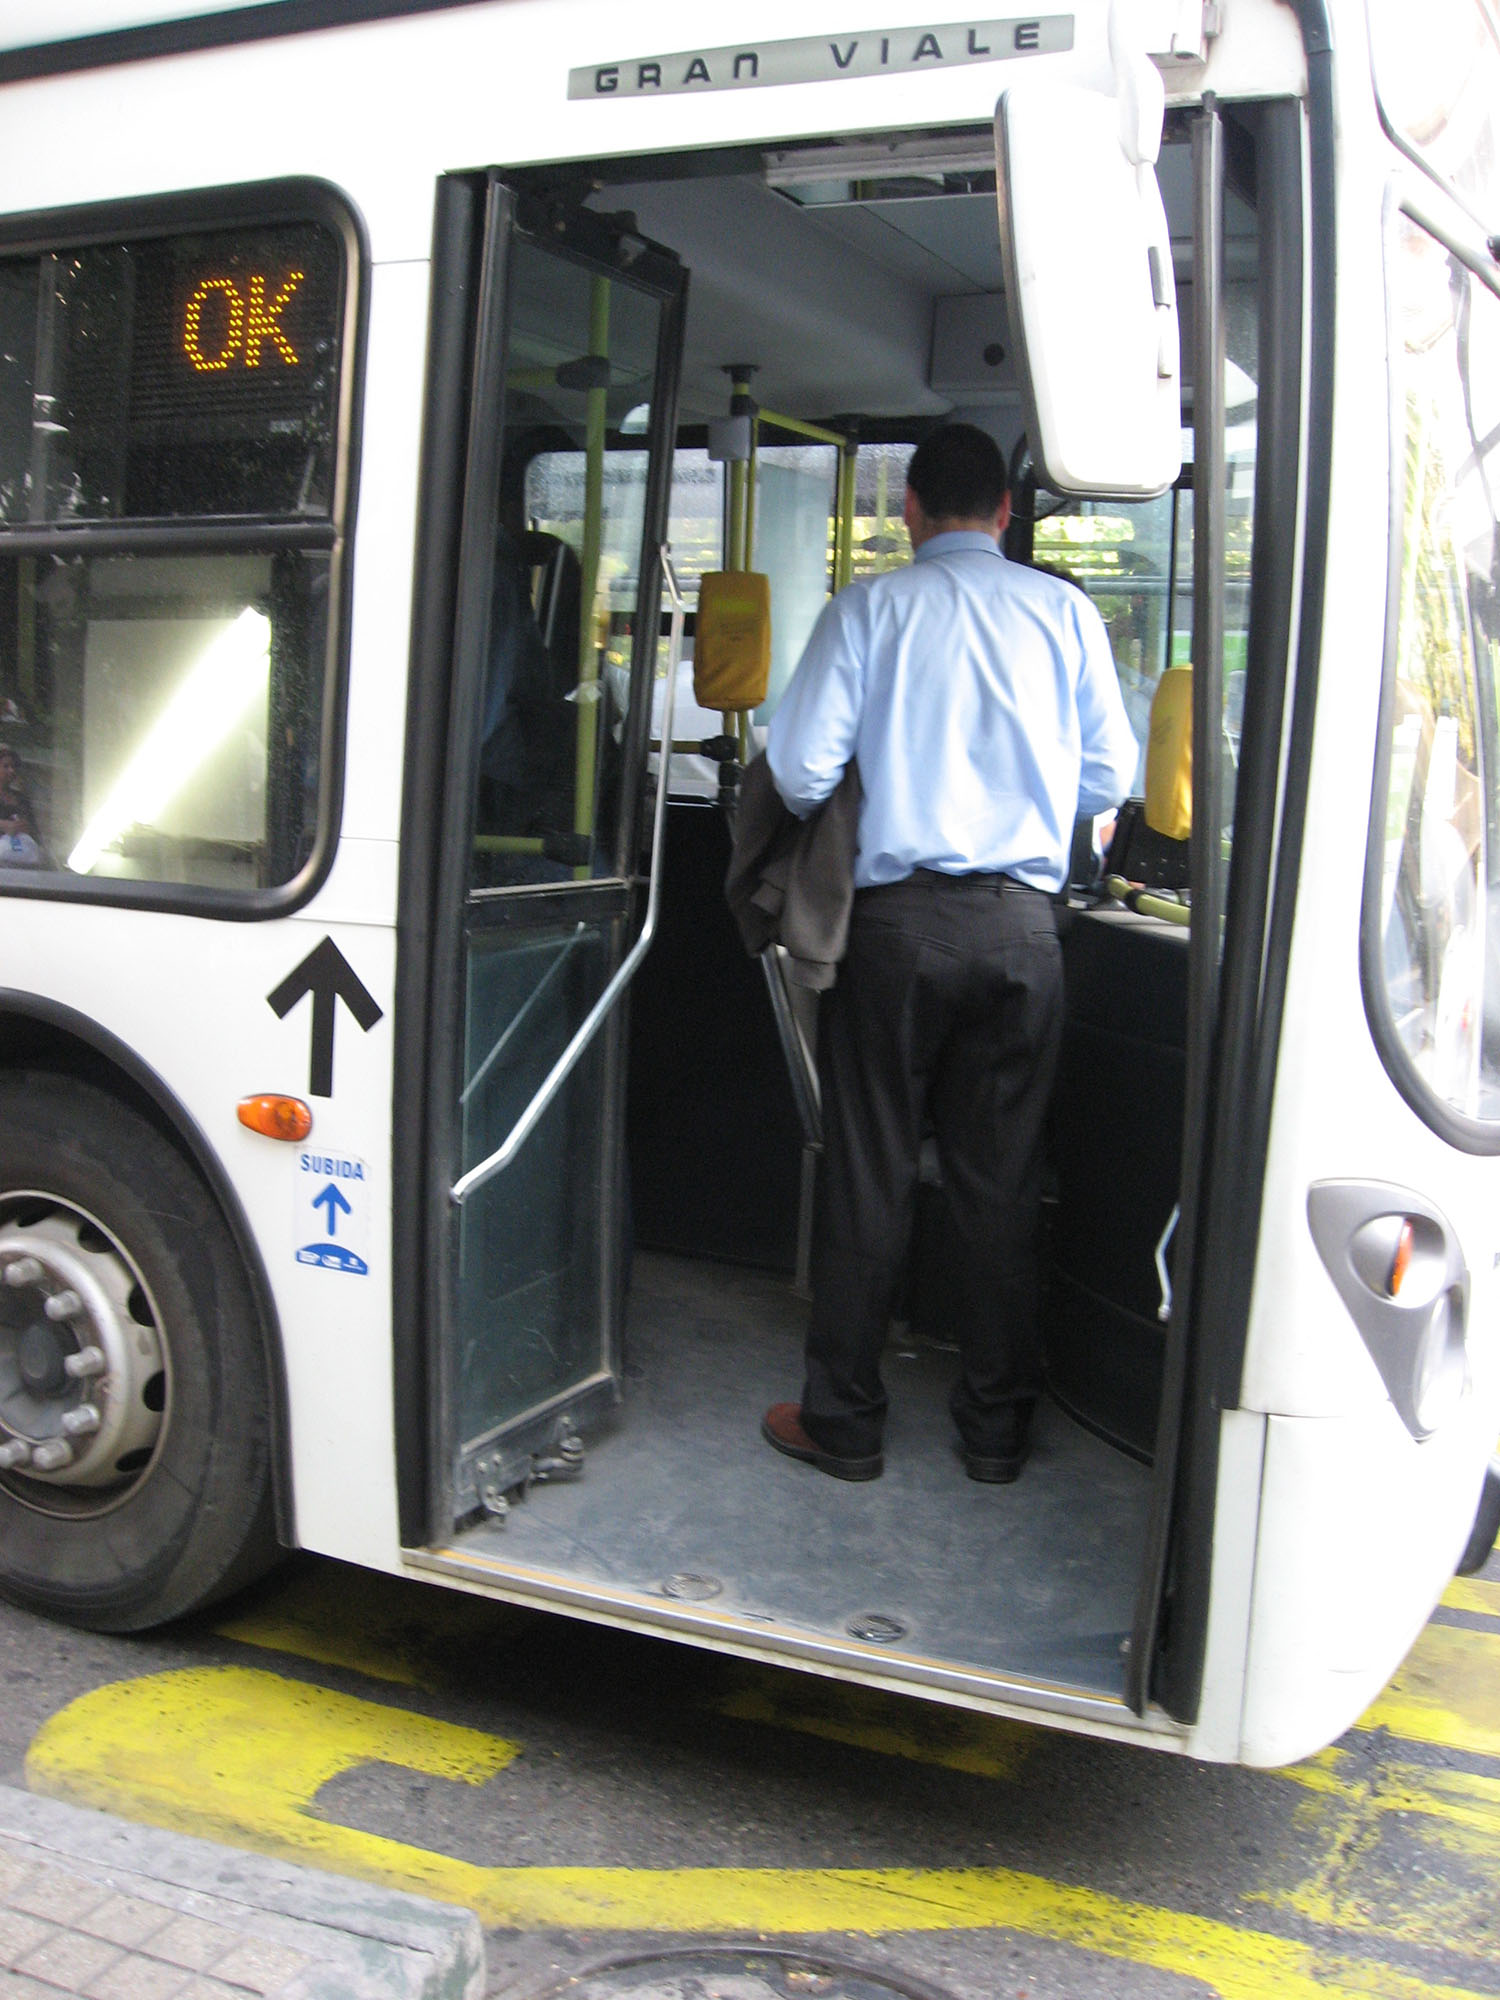 Fig. 20.10 Low-floor vehicles without platform-level entry and pre-board fare verification can result in longer dwell times and not actually provide access to the physically disabled, as shown in this image from Santiago, Chile